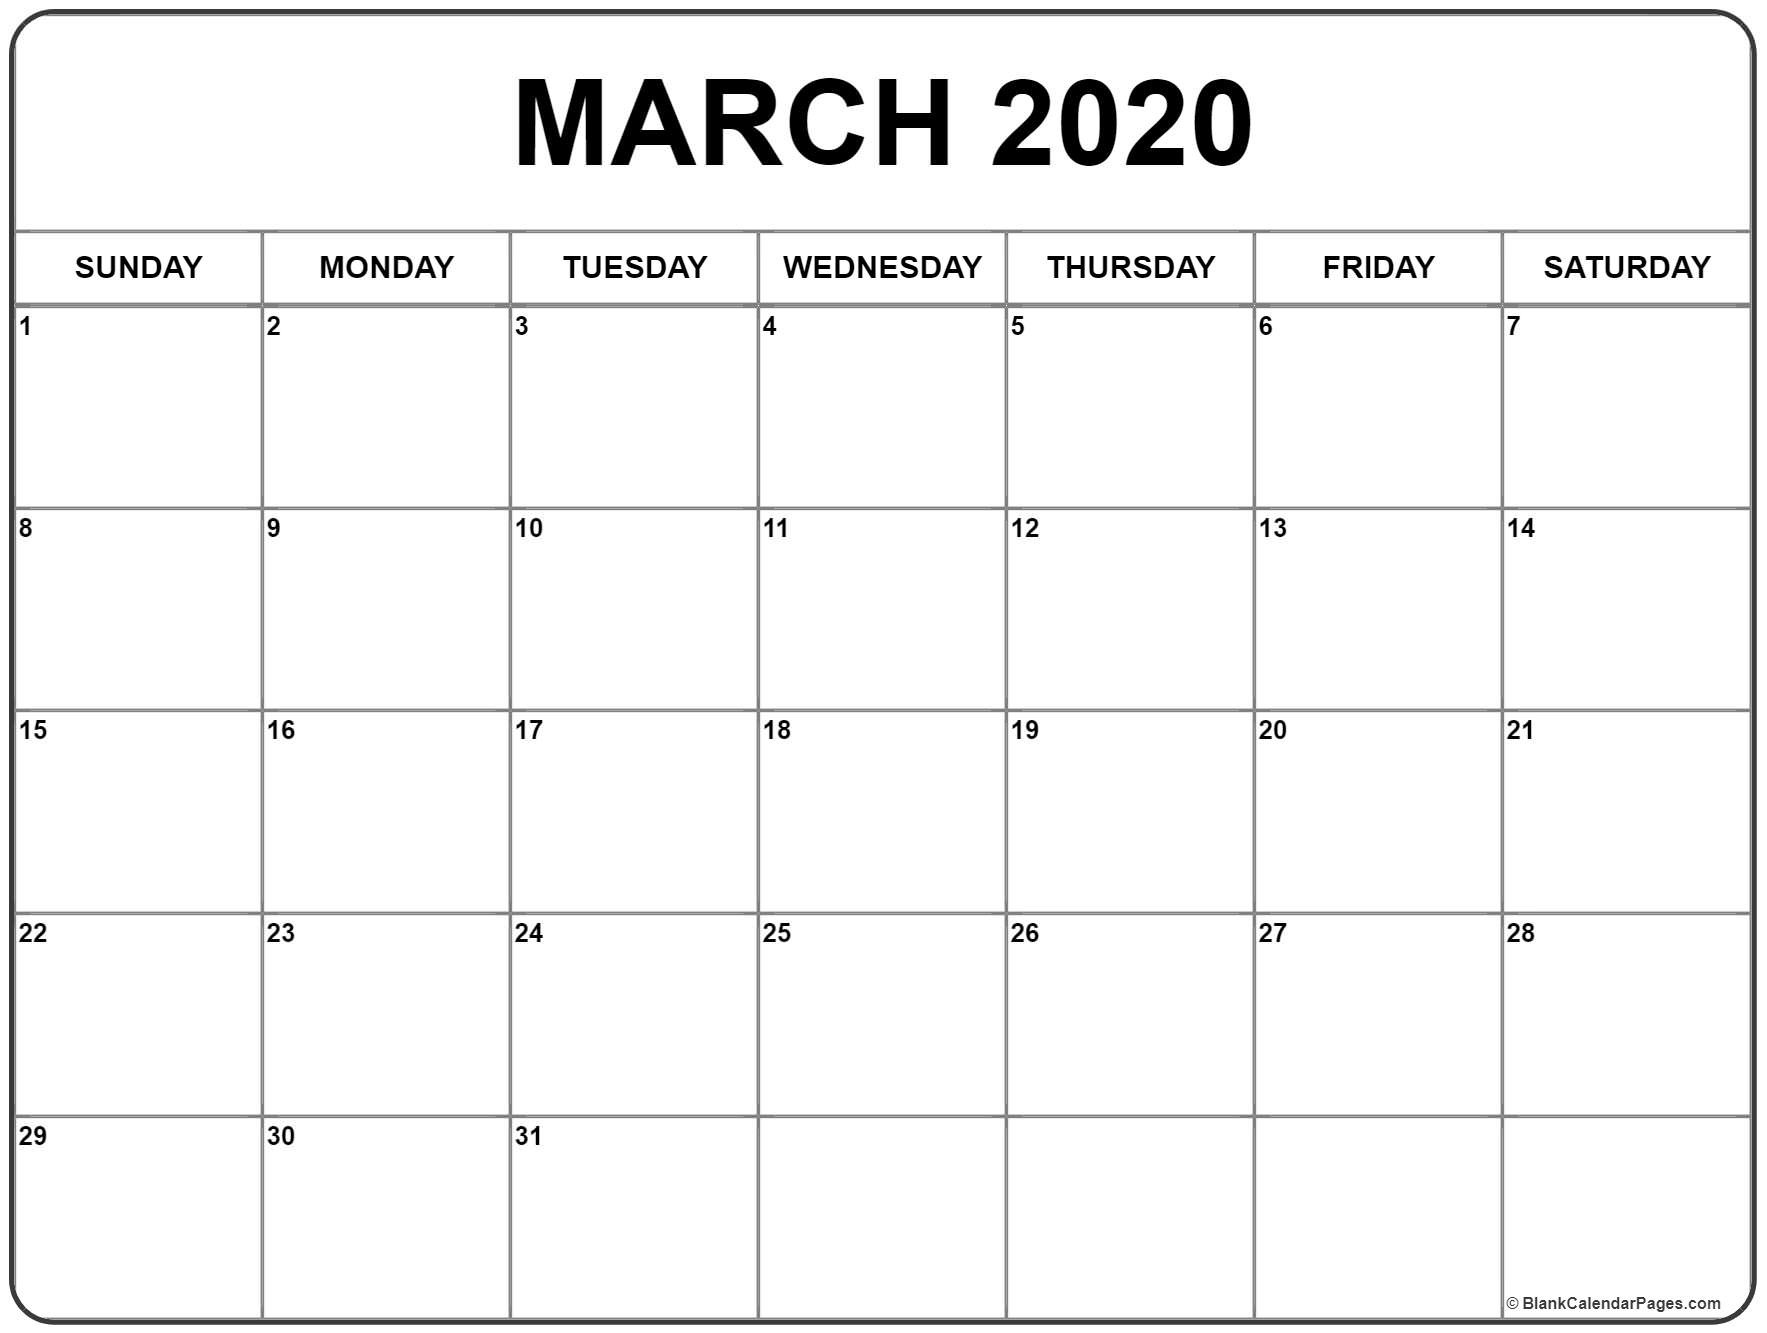 March 2020 Calendar | Free Printable Monthly Calendars-Printable Monday-Friday Calendar 2020 Monthly